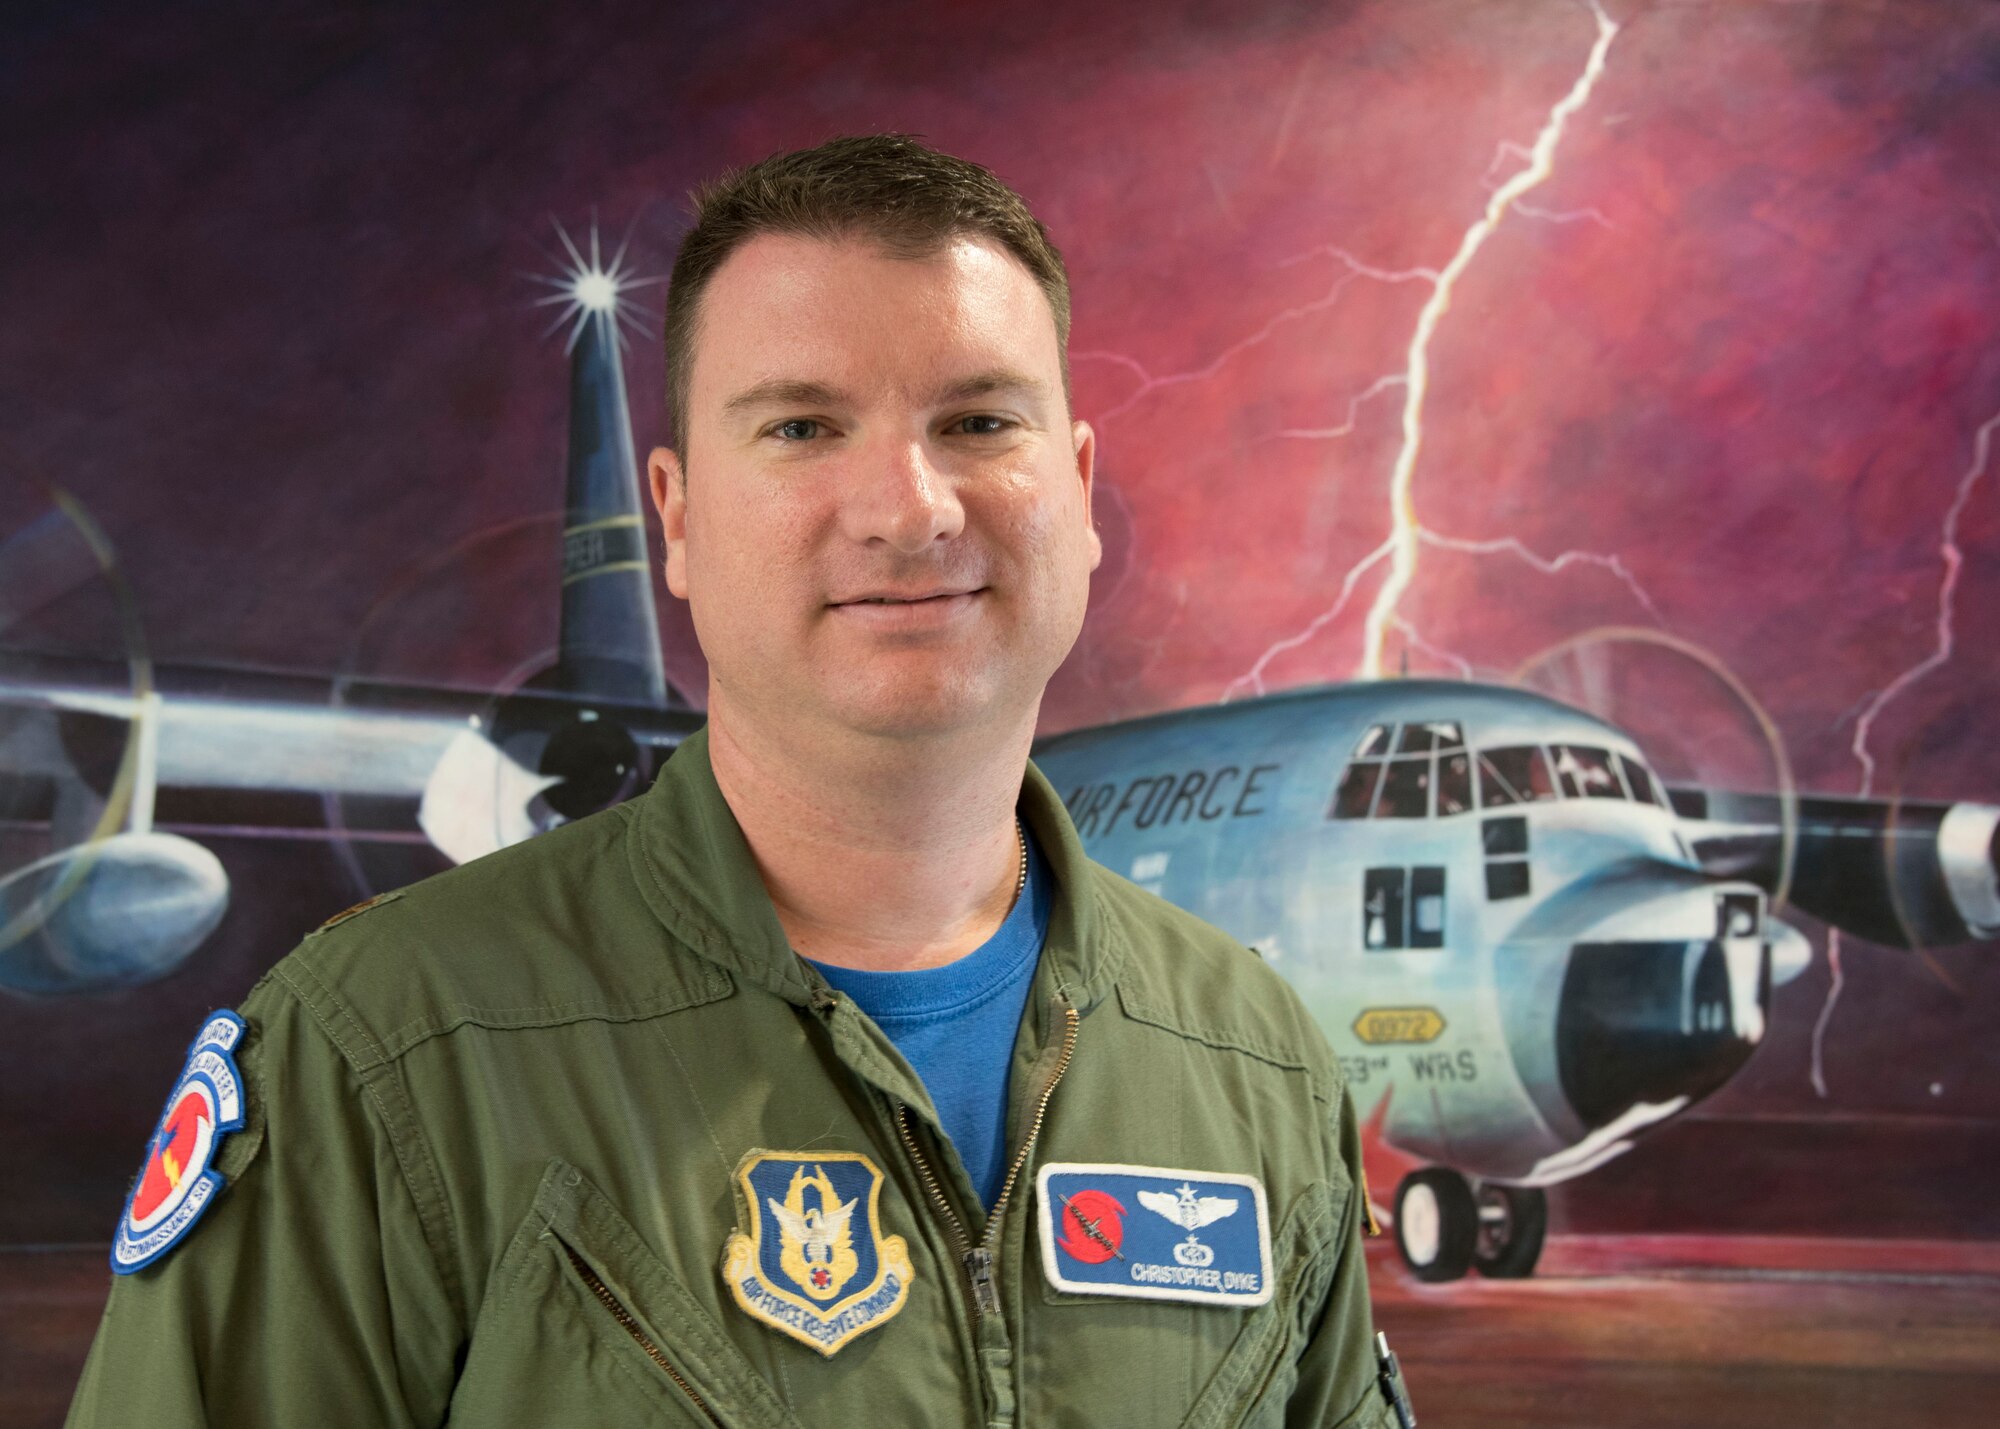 Maj. Christopher Dyke is an aerial reconnaissance weather officer in the 53rd Weather Reconnaissance Squadron, an Air Force Reserve unit in the 403rd Wing, Keesler Air Force Base, Mississippi. Dyke has flown 337 sorties and has more than 1,200 flight hours gathering information that improves National Hurricane Center forecasts and storm warnings, which helps to ensure public safety. (U.S. Air Force photo/Maj. Marnee A.C. Losurdo)